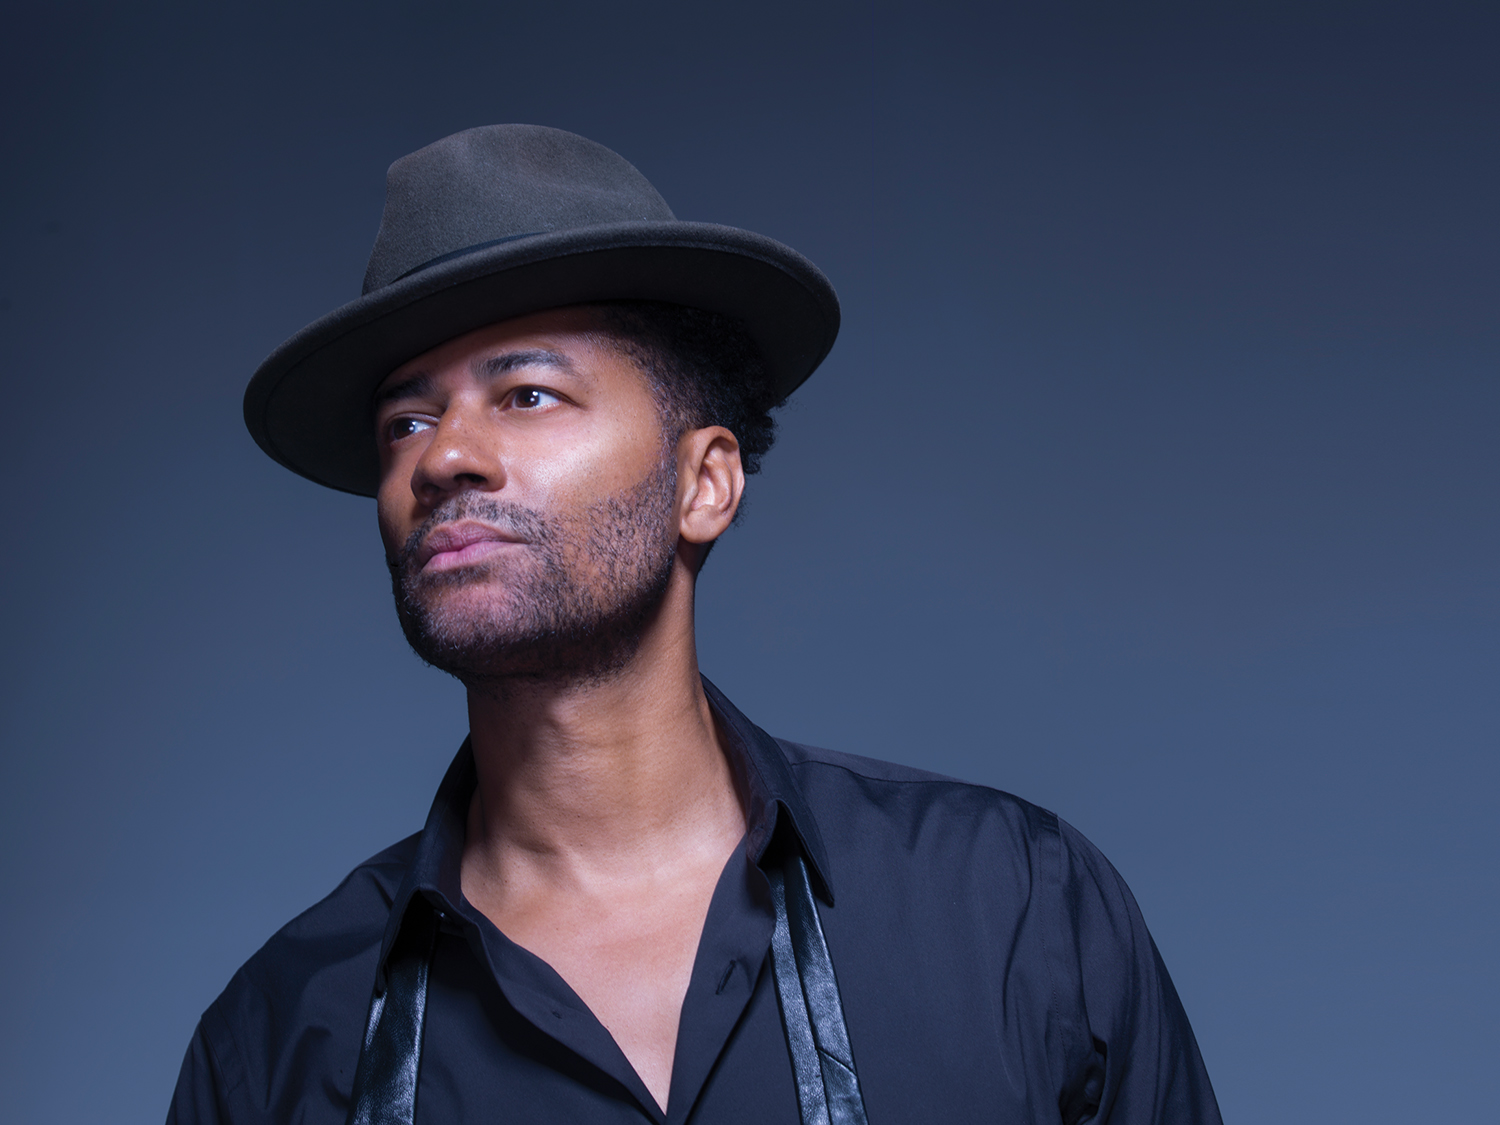 Eric Benét and co have teamed up with Cuban artists for a new album picture